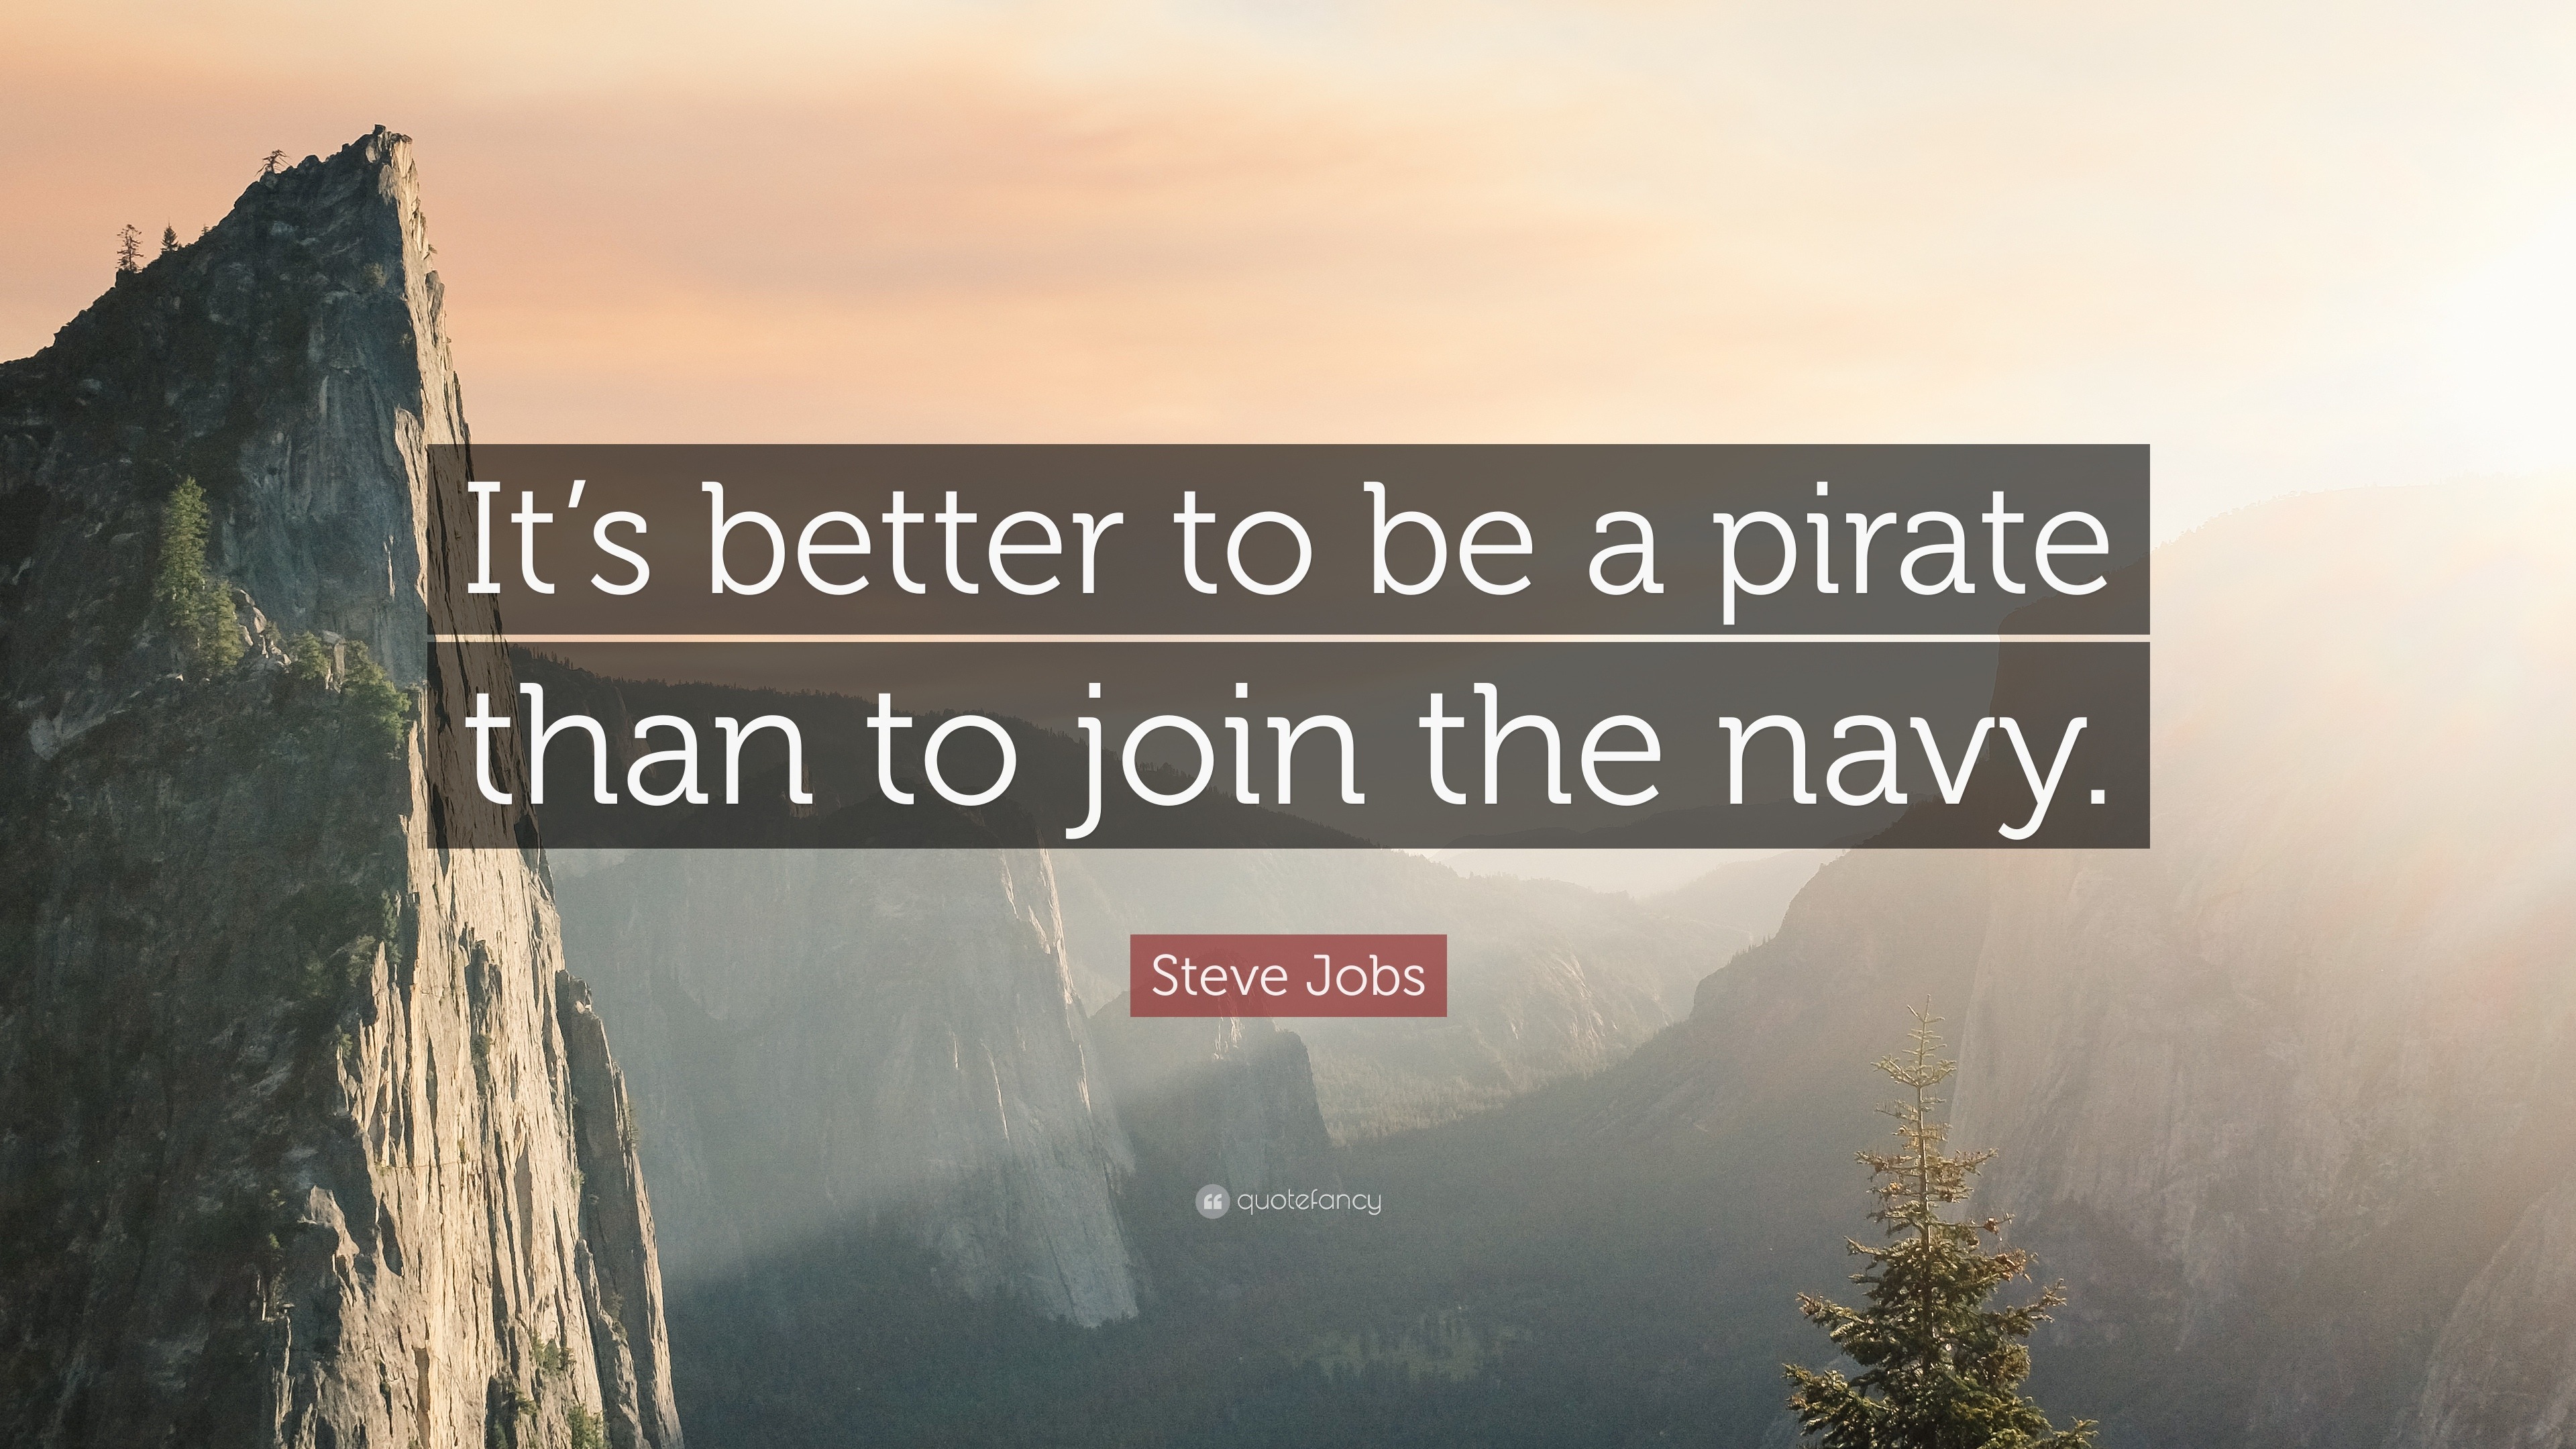 Steve Jobs Quote: “It’s better to be a pirate than to join the navy.”